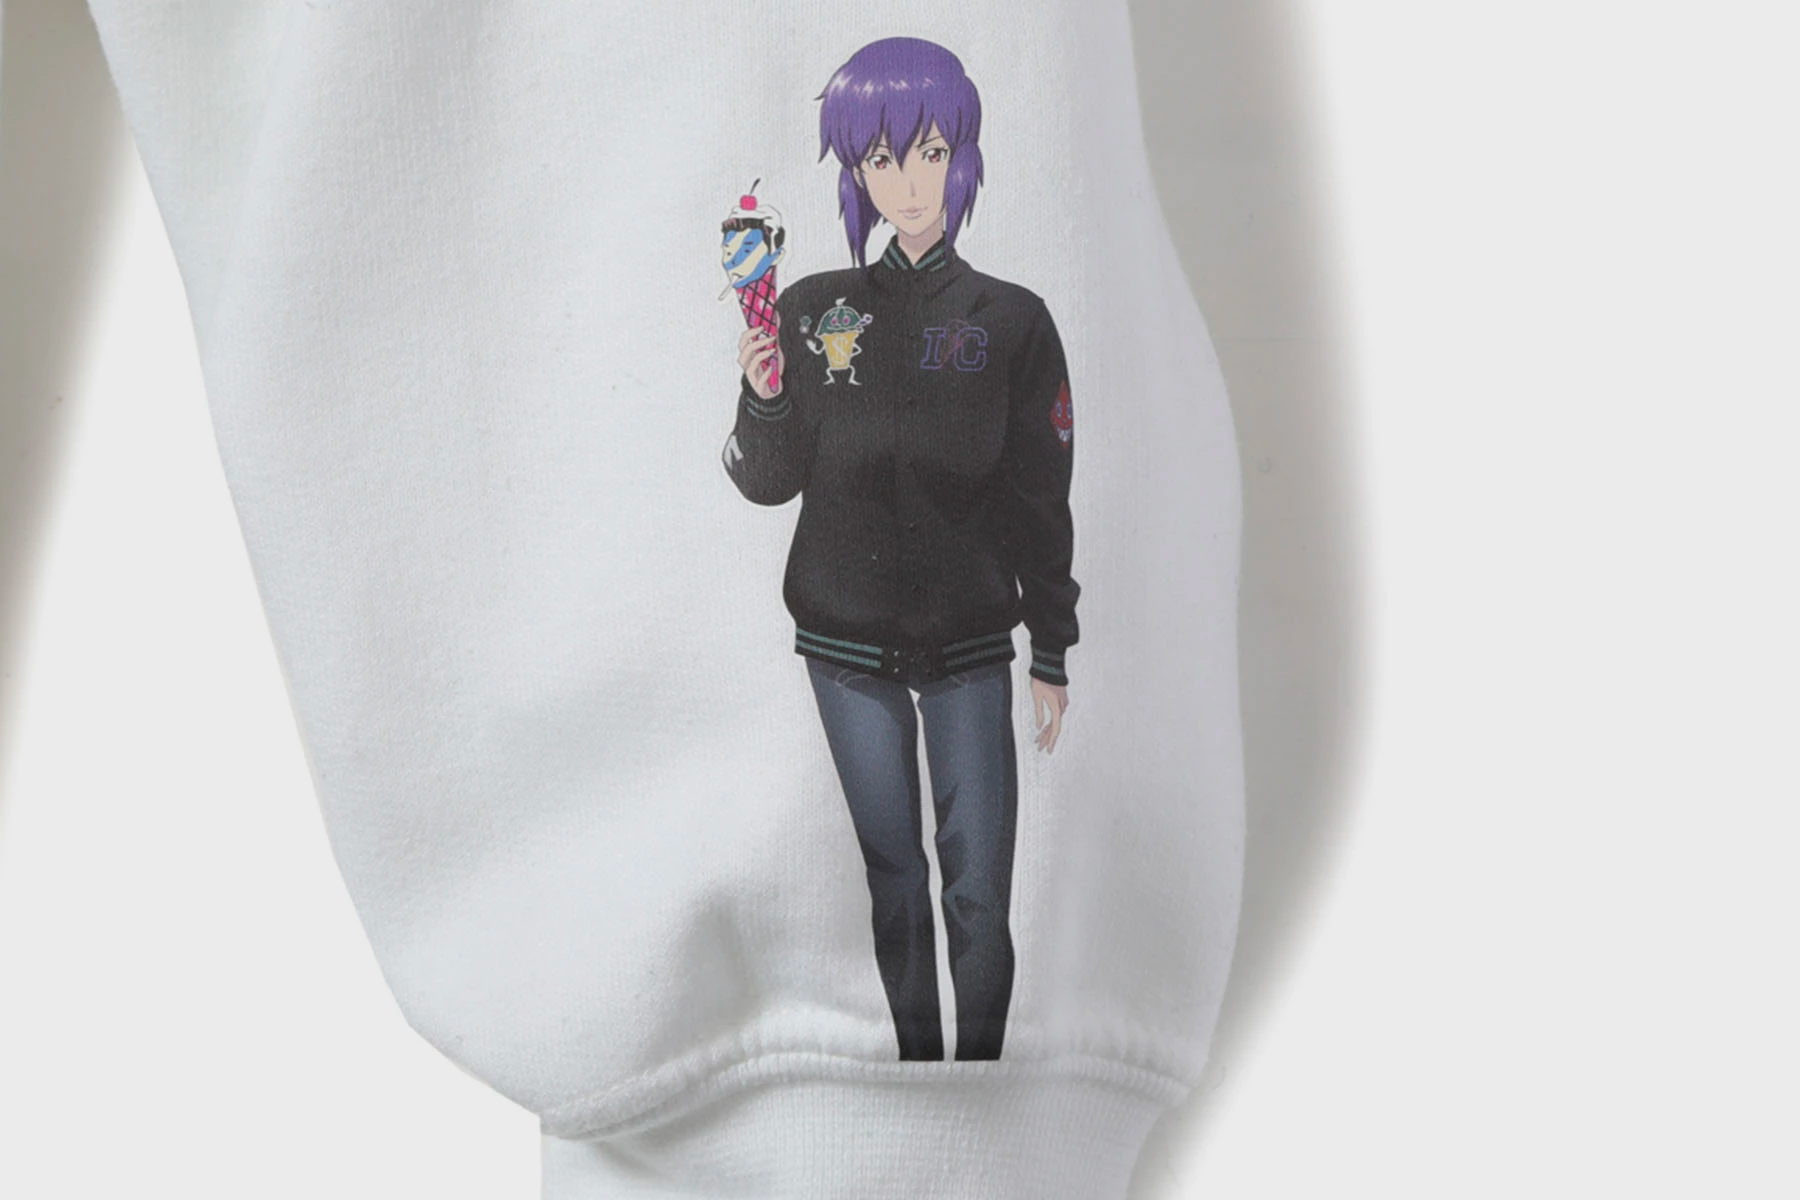 ICECREAM x 'Ghost in the Shell: Stand Alone Complex' Capsule 